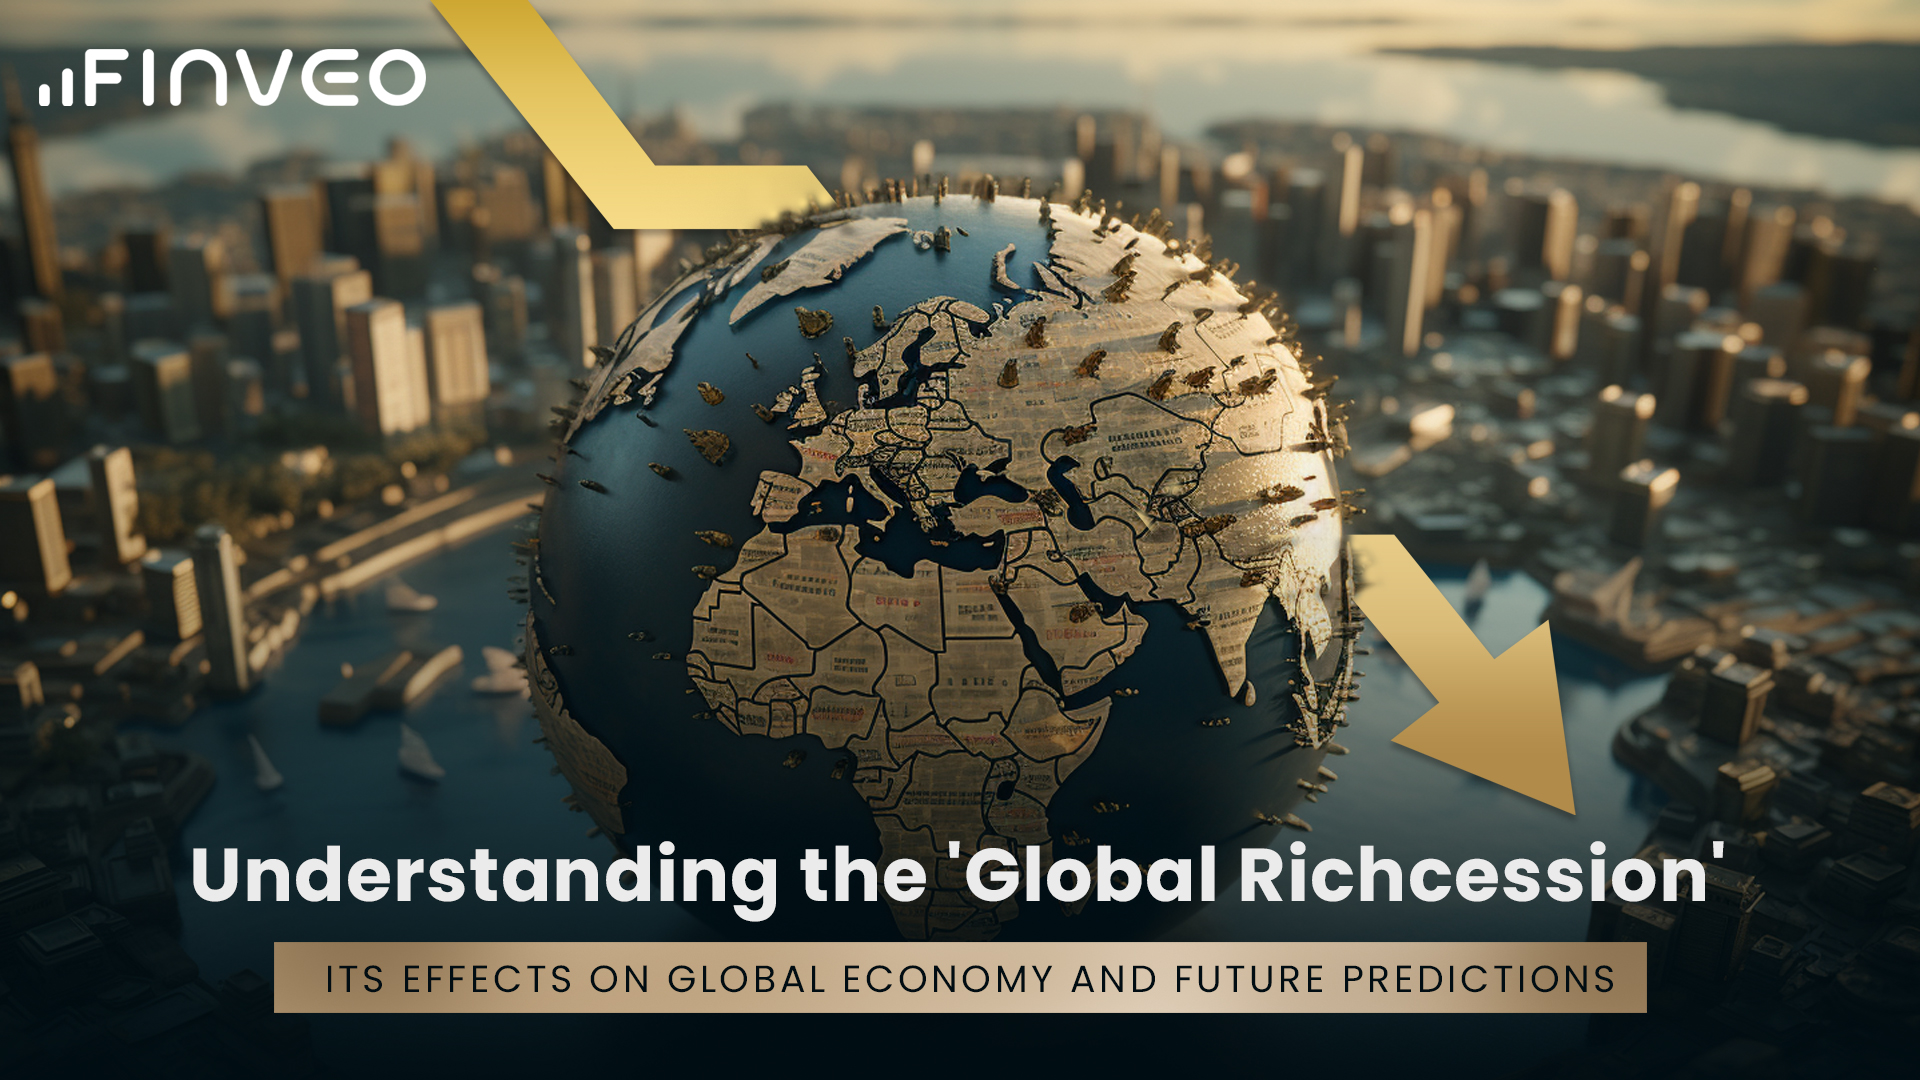 UNDERSTANDING THE 'RICHCESSION': ITS EFFECTS ON GLOBAL ECONOMY AND FUTURE PREDICTIONS